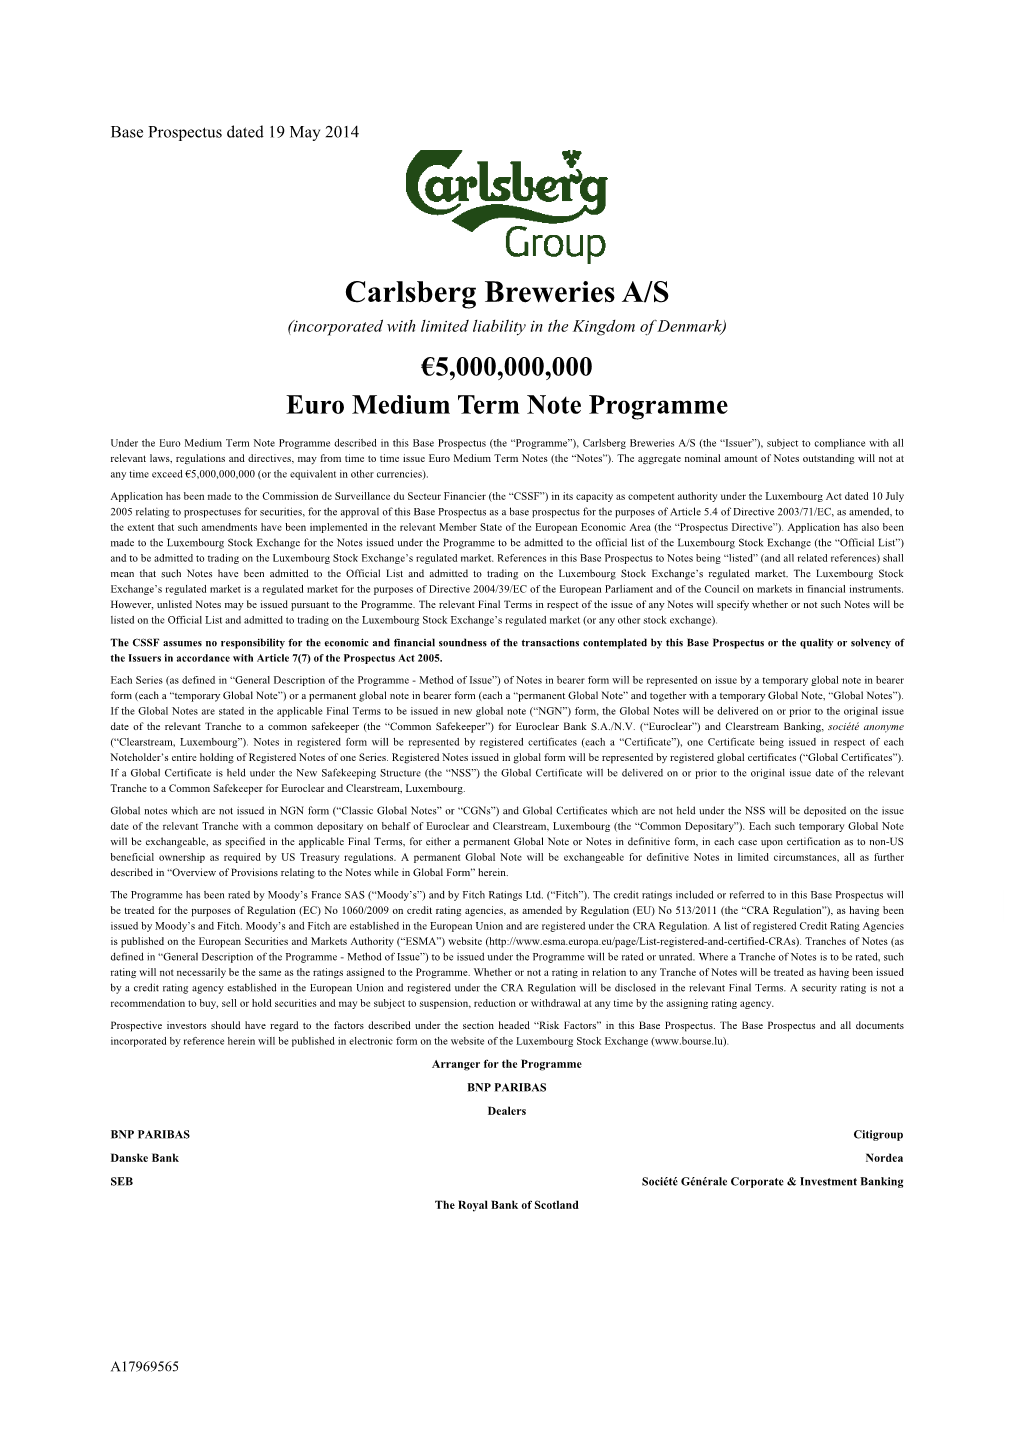 Carlsberg Breweries A/S (Incorporated with Limited Liability in the Kingdom of Denmark) €5,000,000,000 Euro Medium Term Note Programme